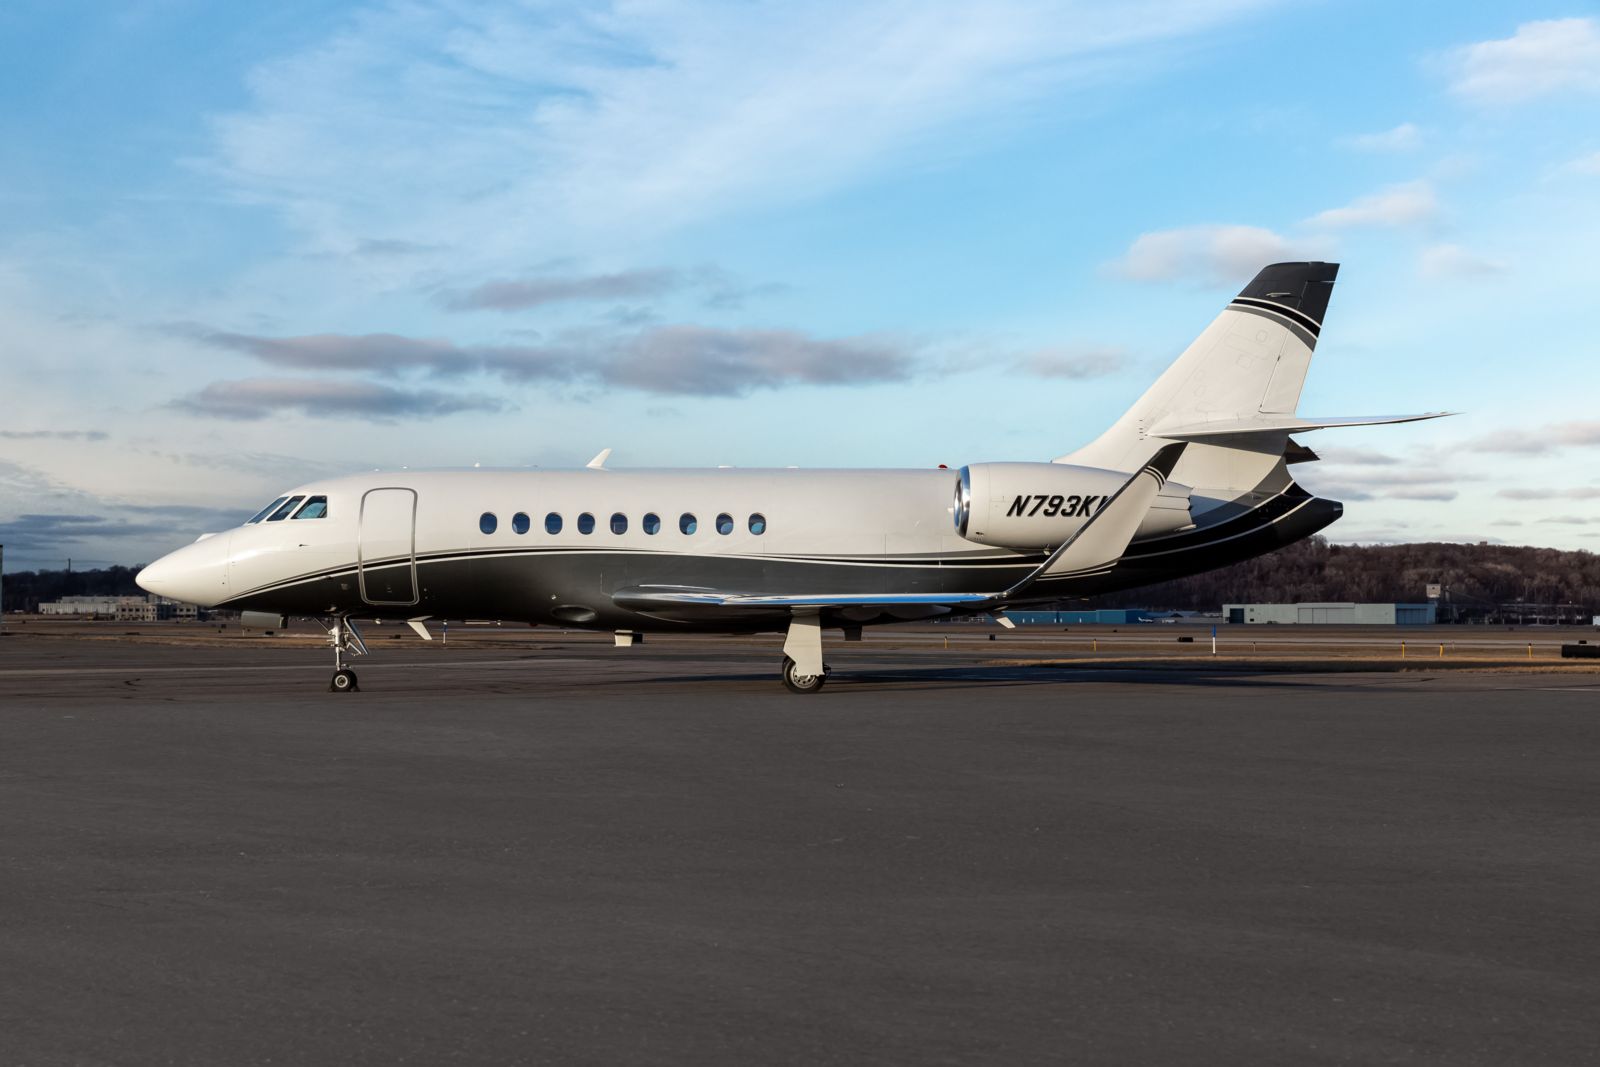 Dassault Falcon 2000LX  S/N 202 for sale | gallery image: /userfiles/files/bfp_4195.jpg